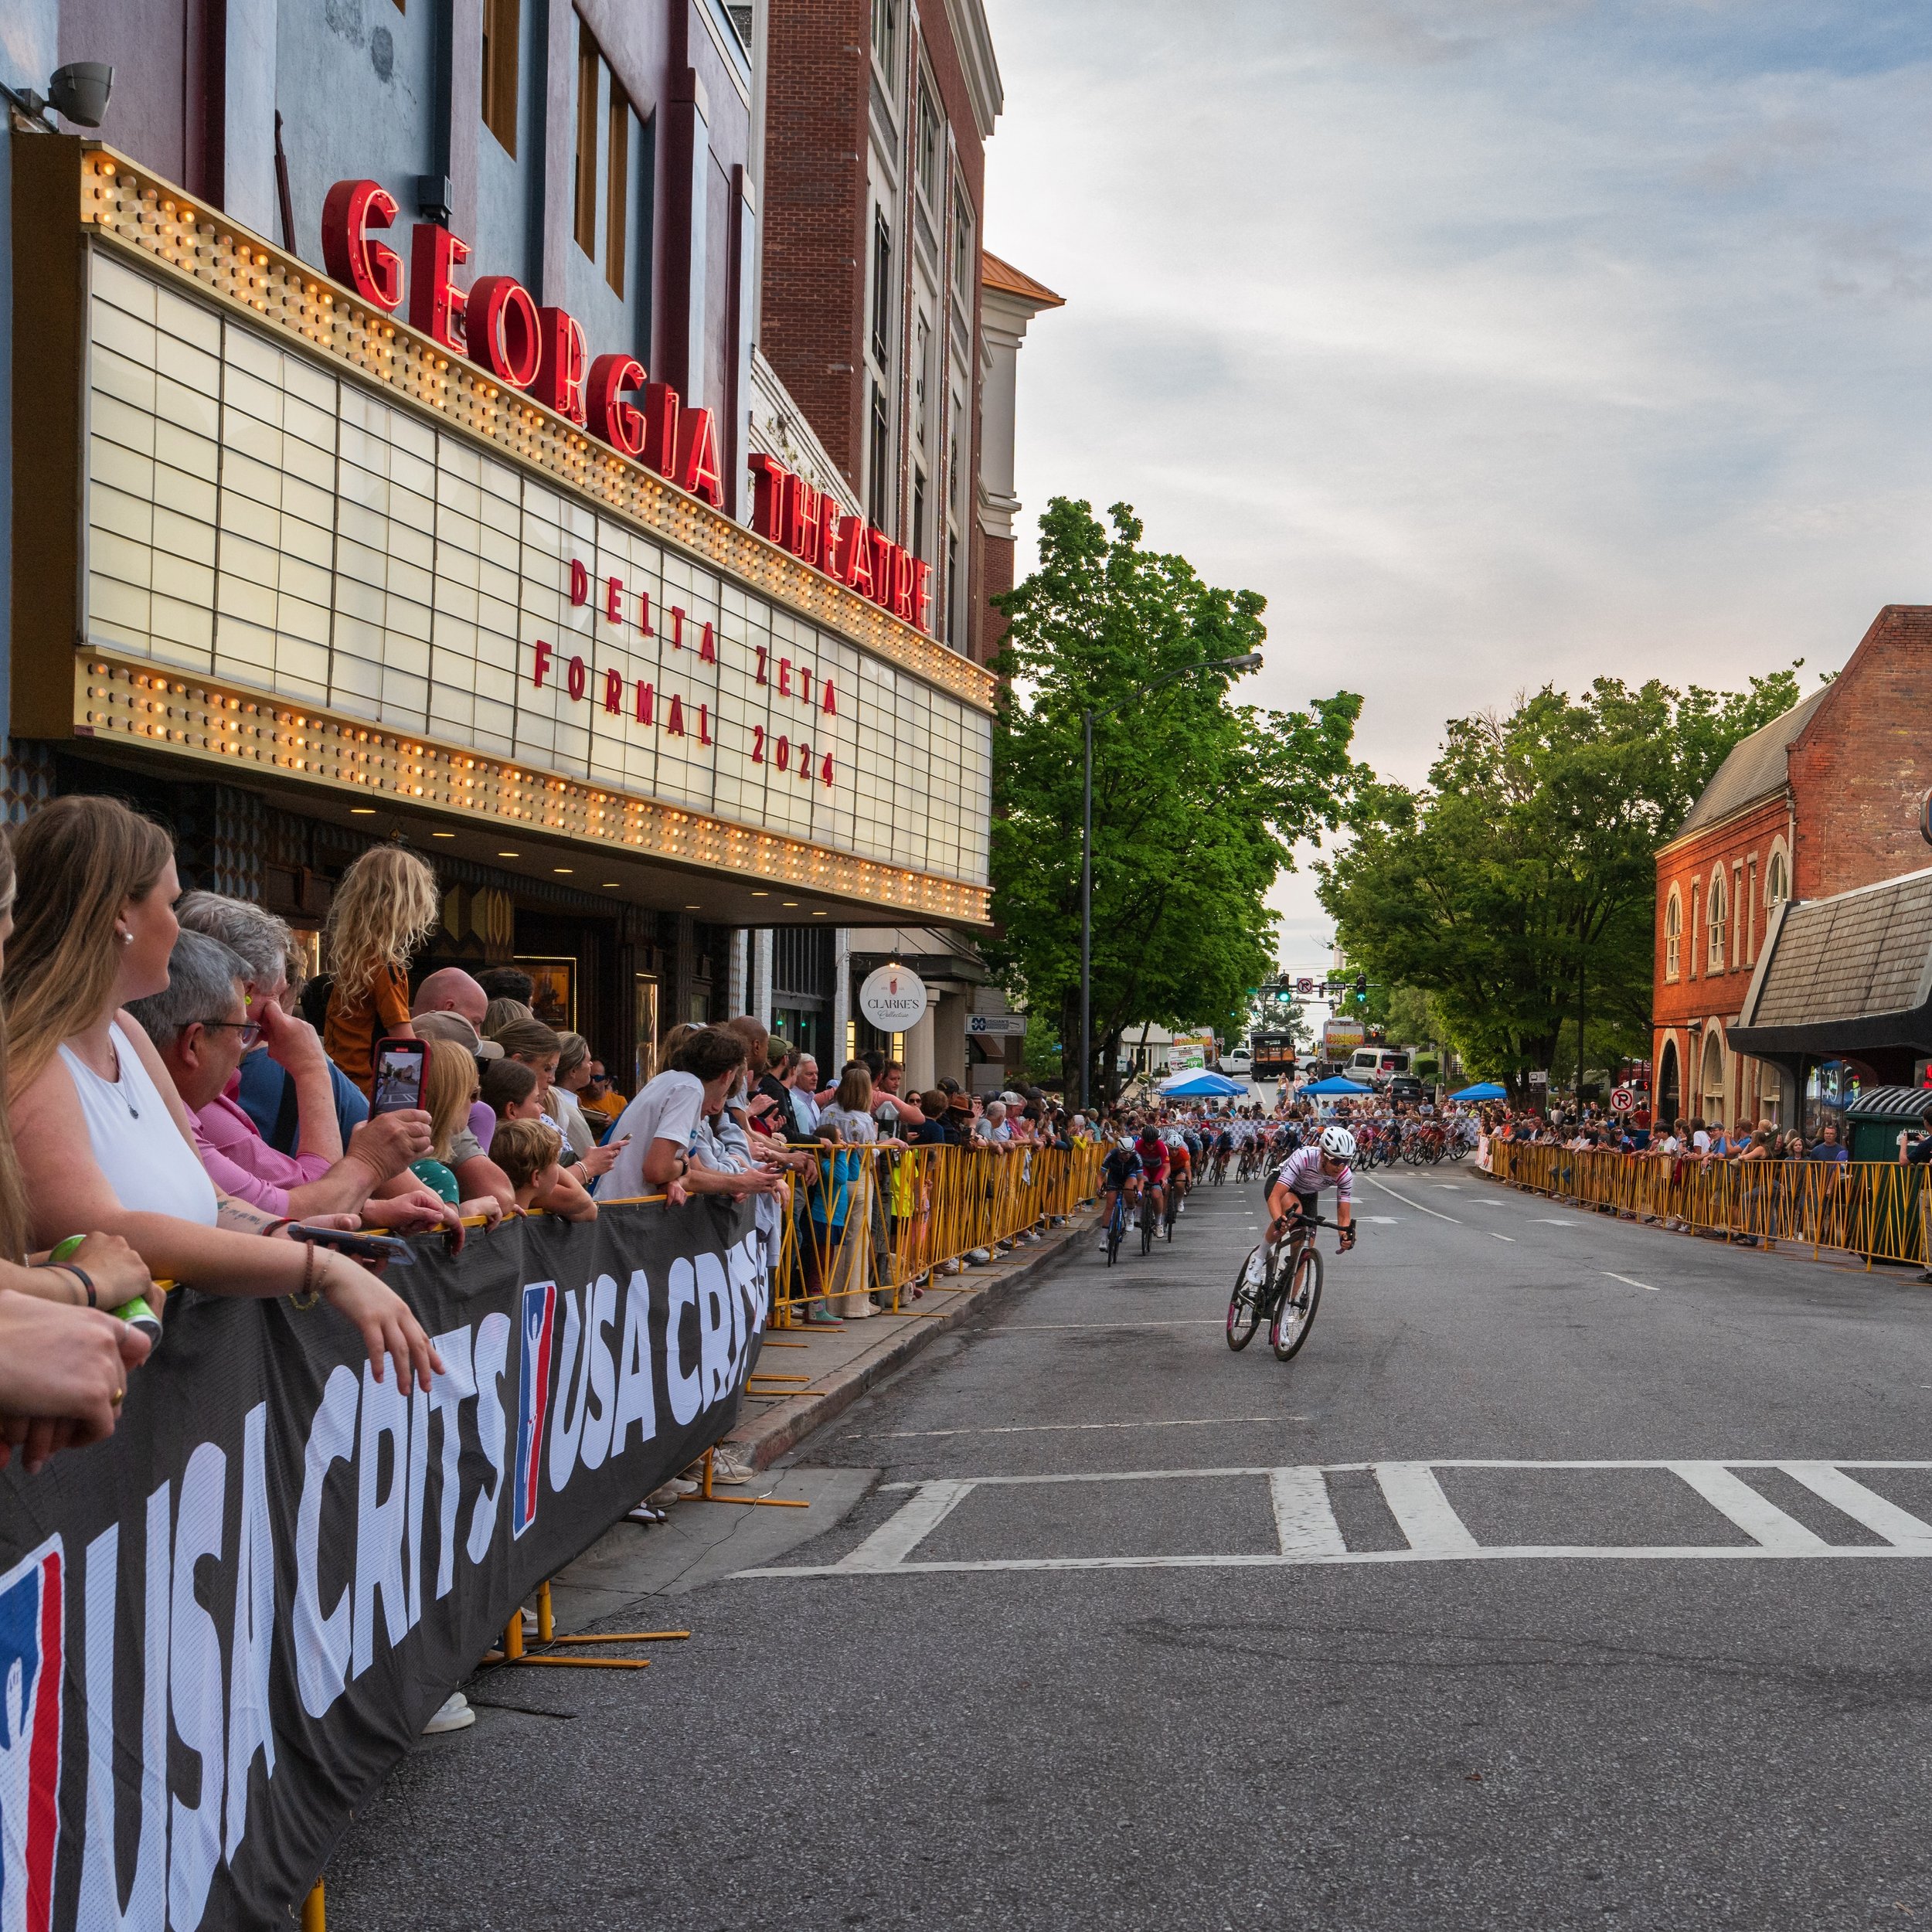 Athens, GA knows how to put on a bike race 🚴🏻&zwj;♀️💨

Twilight was one of my favorite downtown memories while at UGA. As a has-been triathlete turned road cyclist, it was so great to see the women&rsquo;s crit this past weekend while being in tow